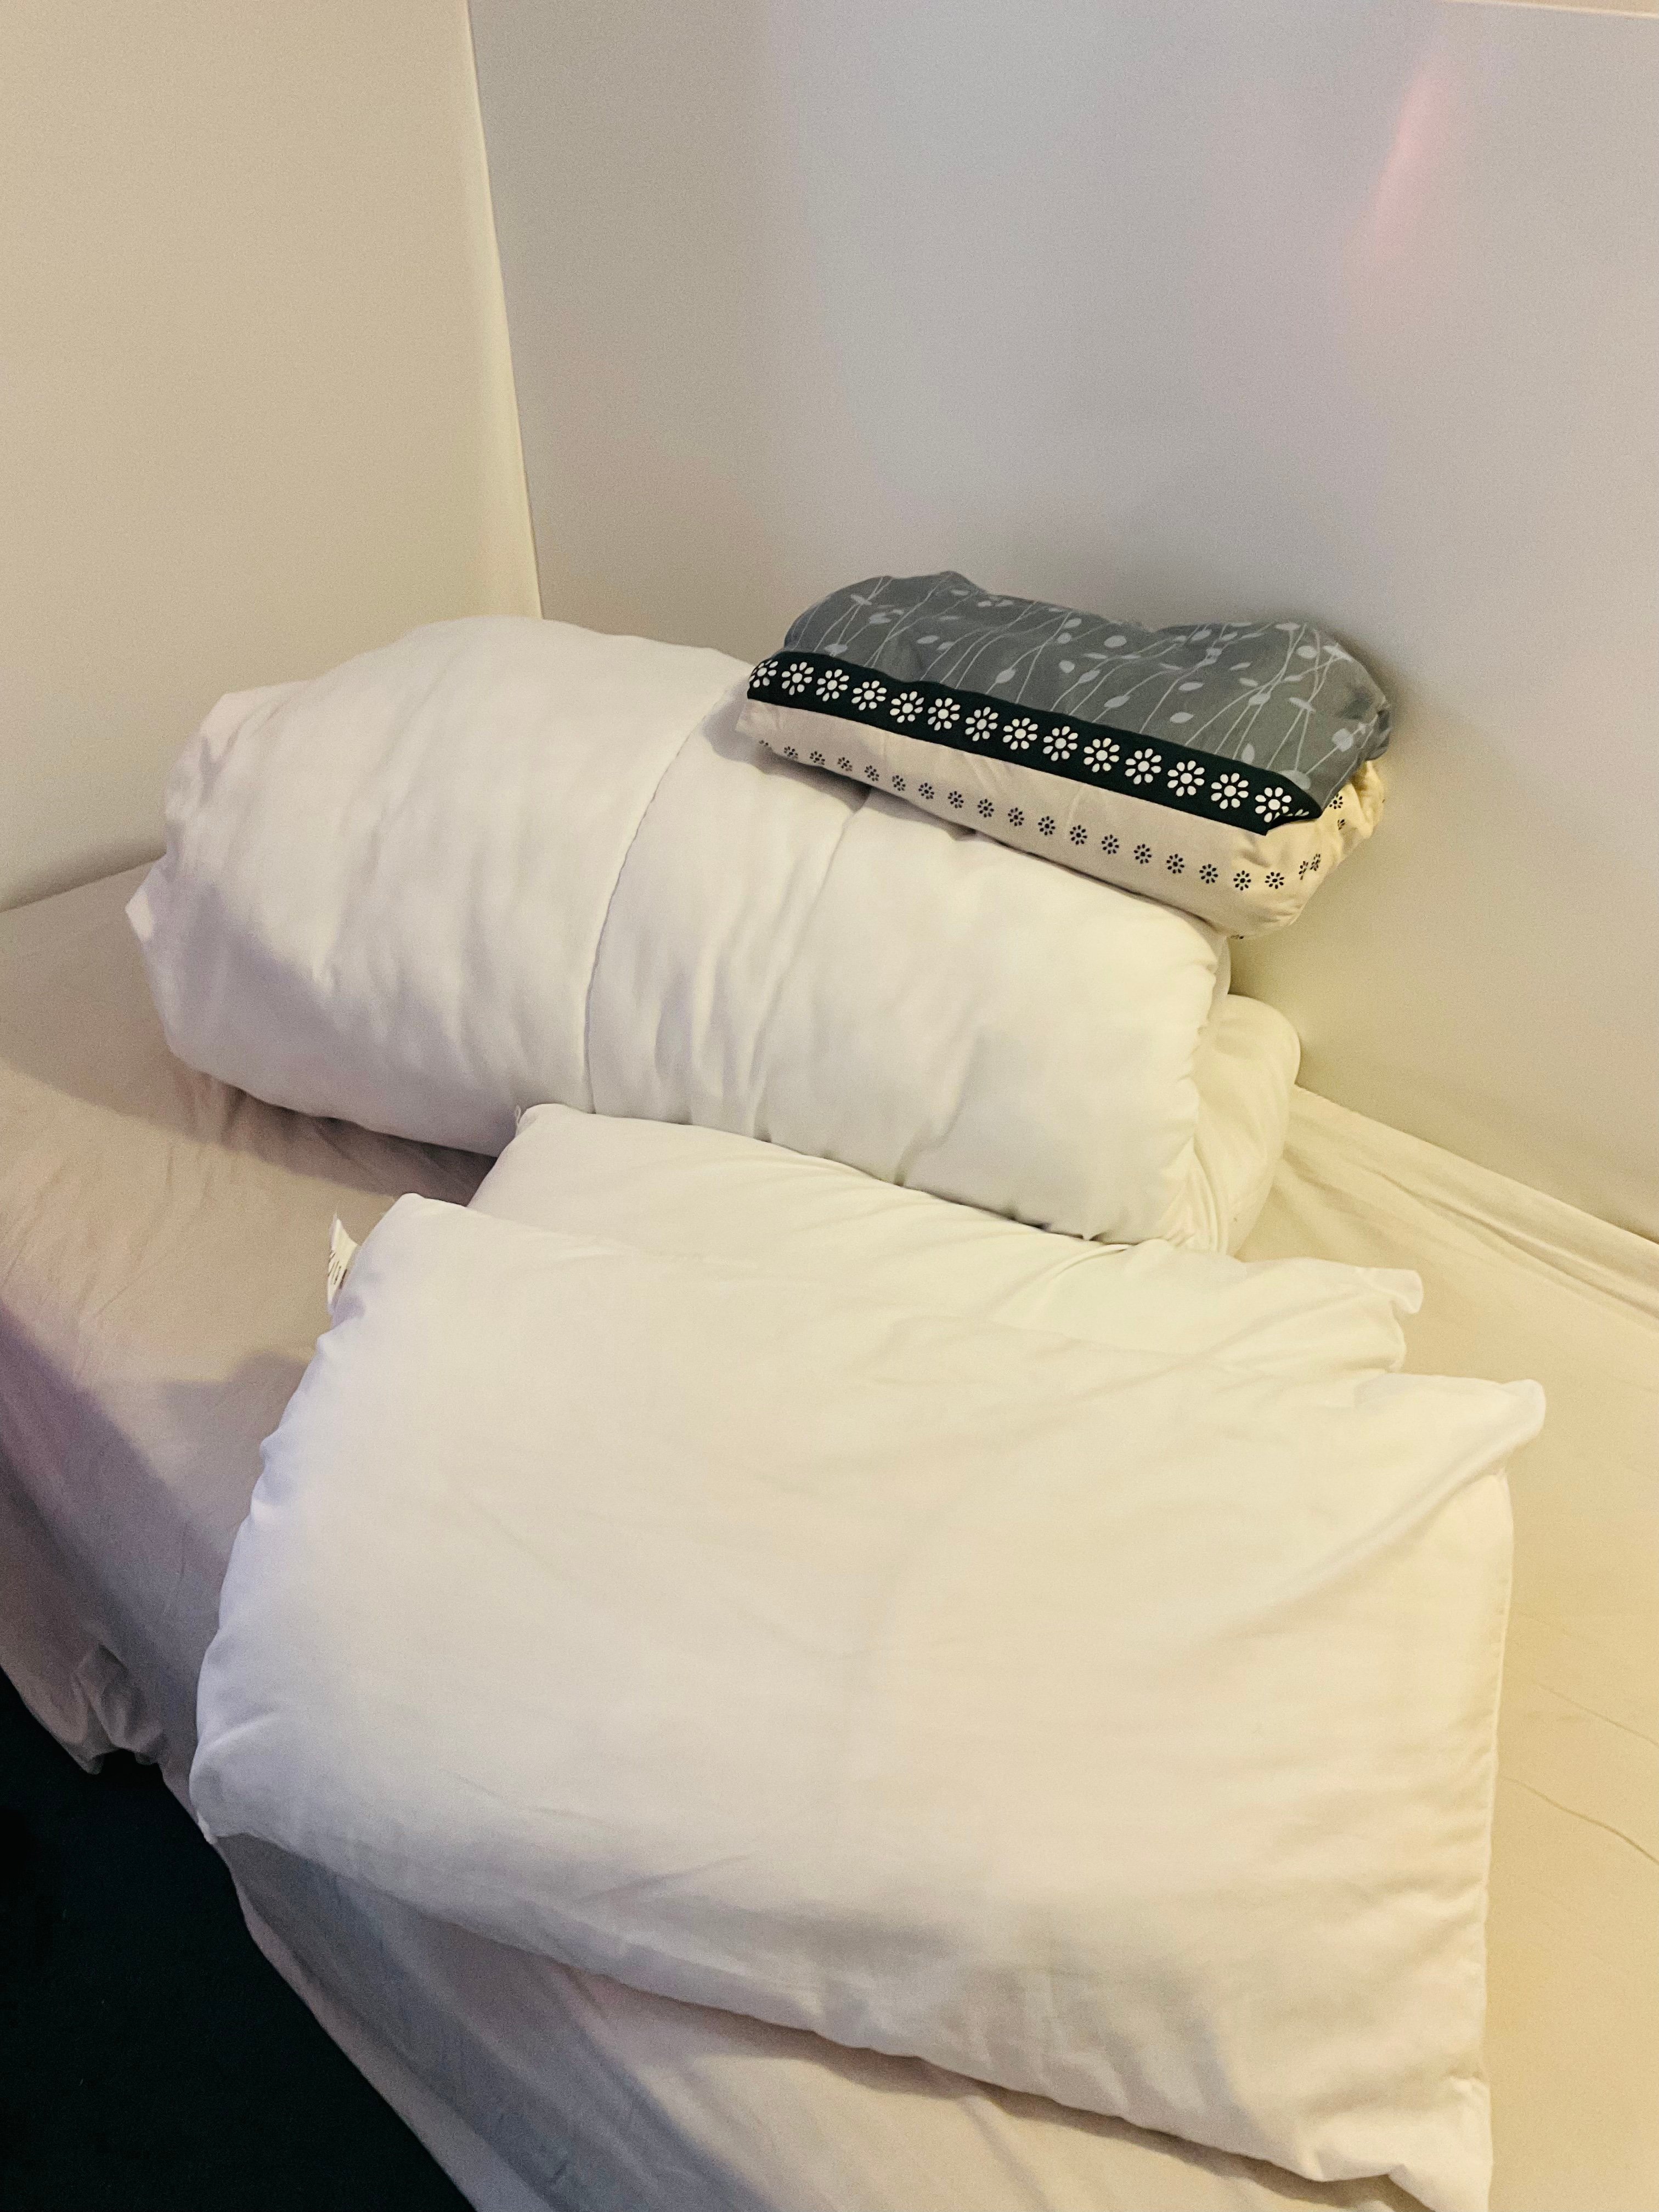 2 pillows and duvet with cover separately